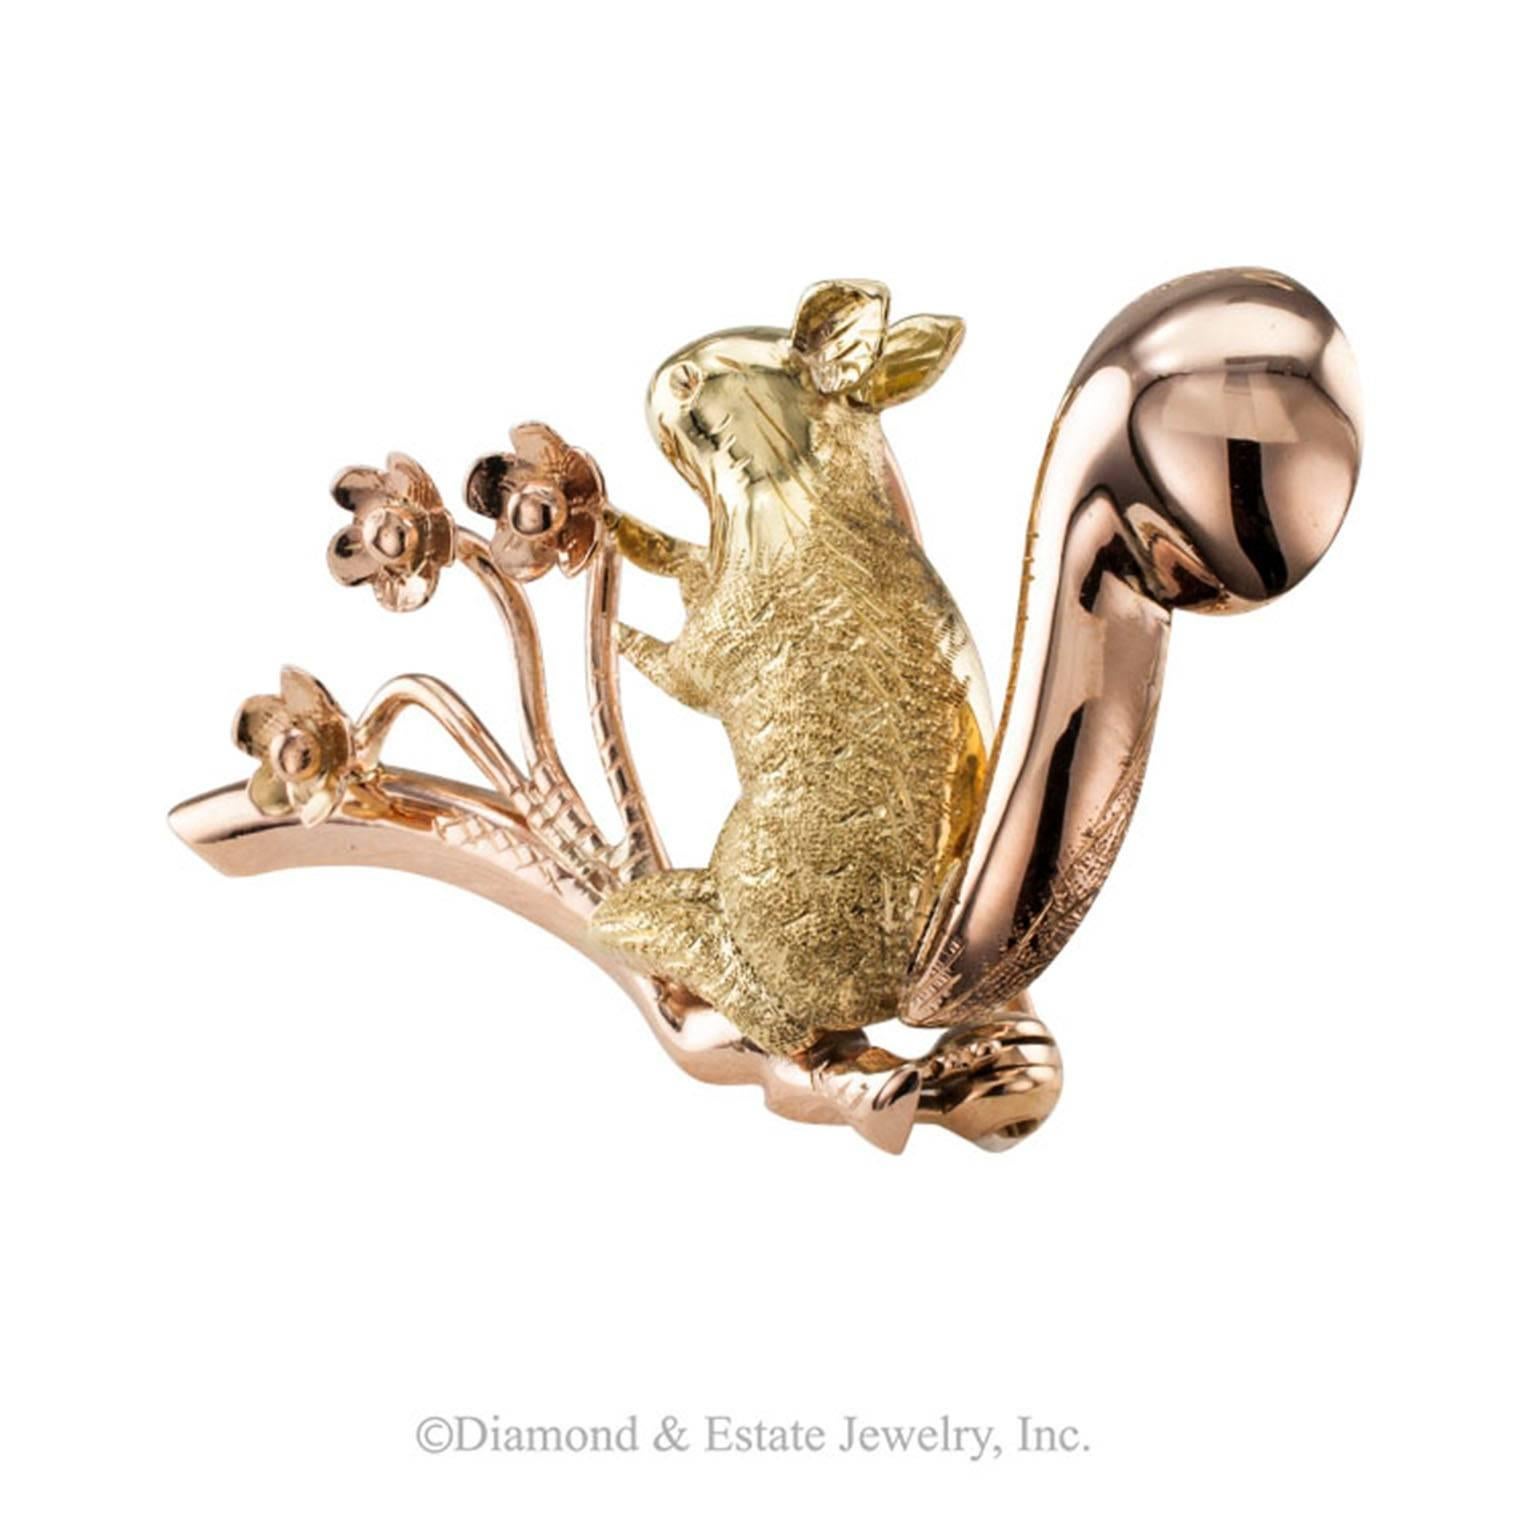 1950s Retro Red Squirrel Brooch Two-Tone 18-Karat Gold

Retro, red squirrel brooch crafted in pink and green 18-karat gold, dated on the back 6-7-58.  A whimsical and delightful squirrel brooch.  It is all gold, but the contrast between the pink